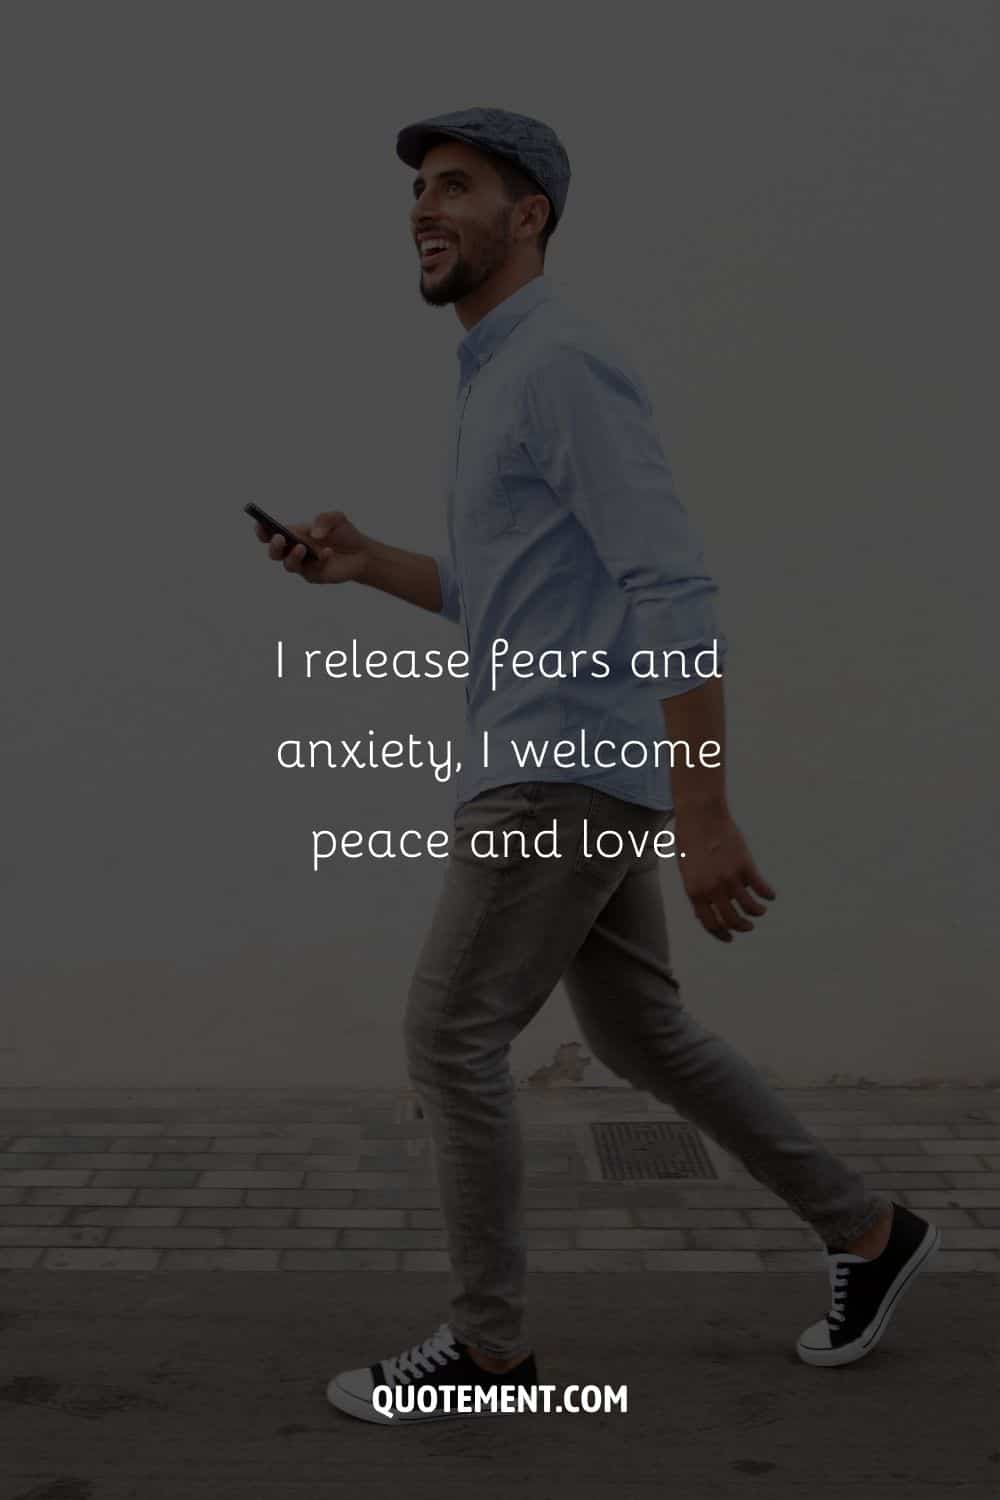 A guy walking with a phone in hand representing an affirmation for anxiety.